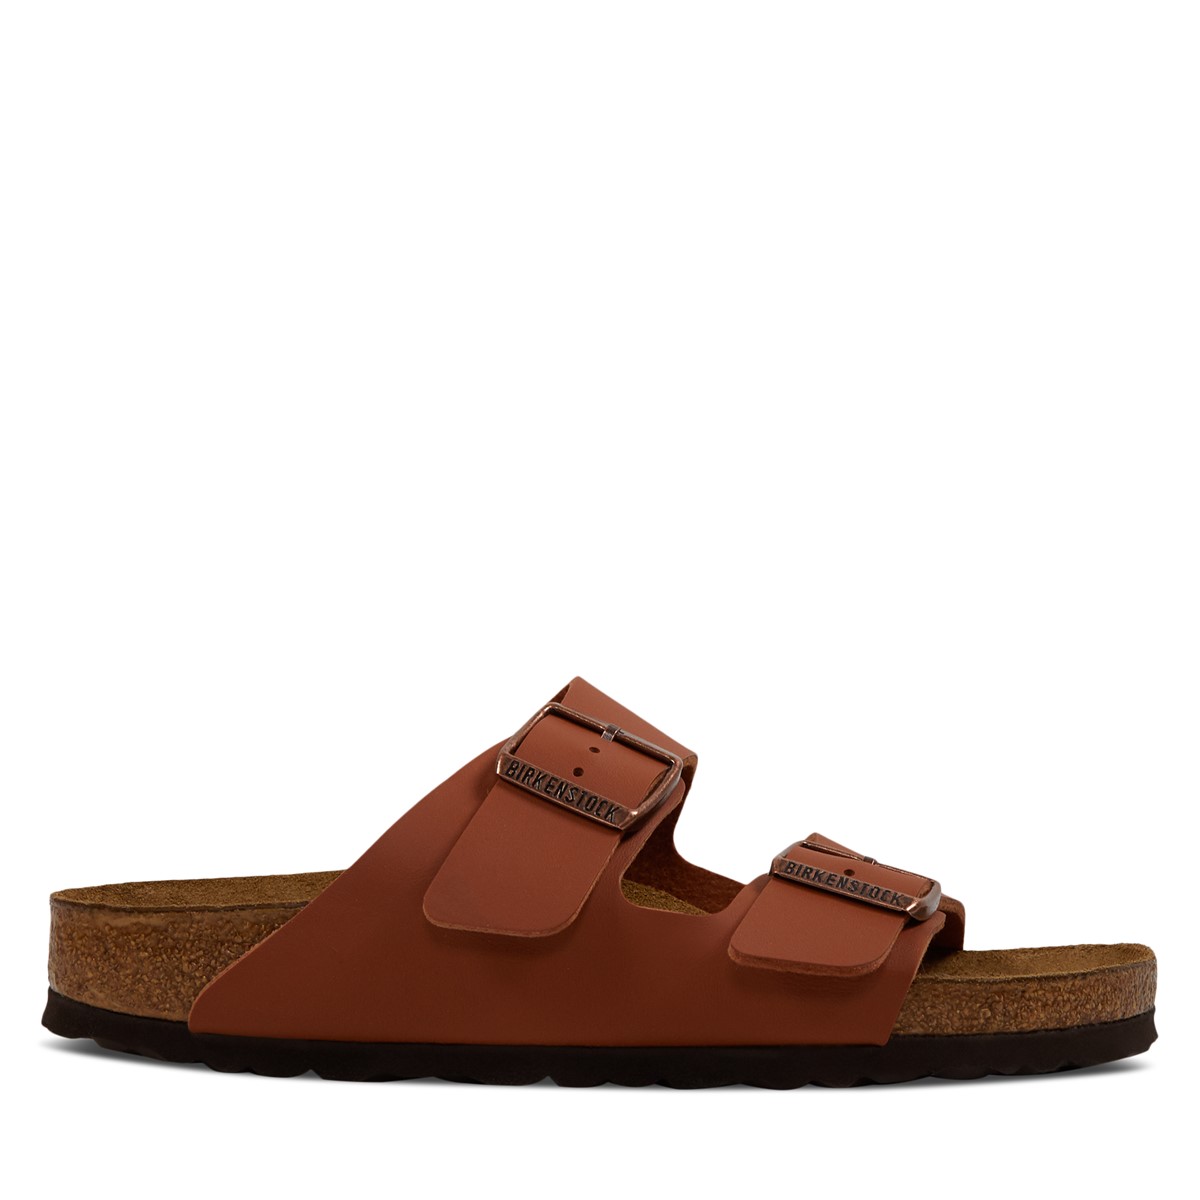 Women's Arizona Soft Footbed Sandals in Ginger Brown